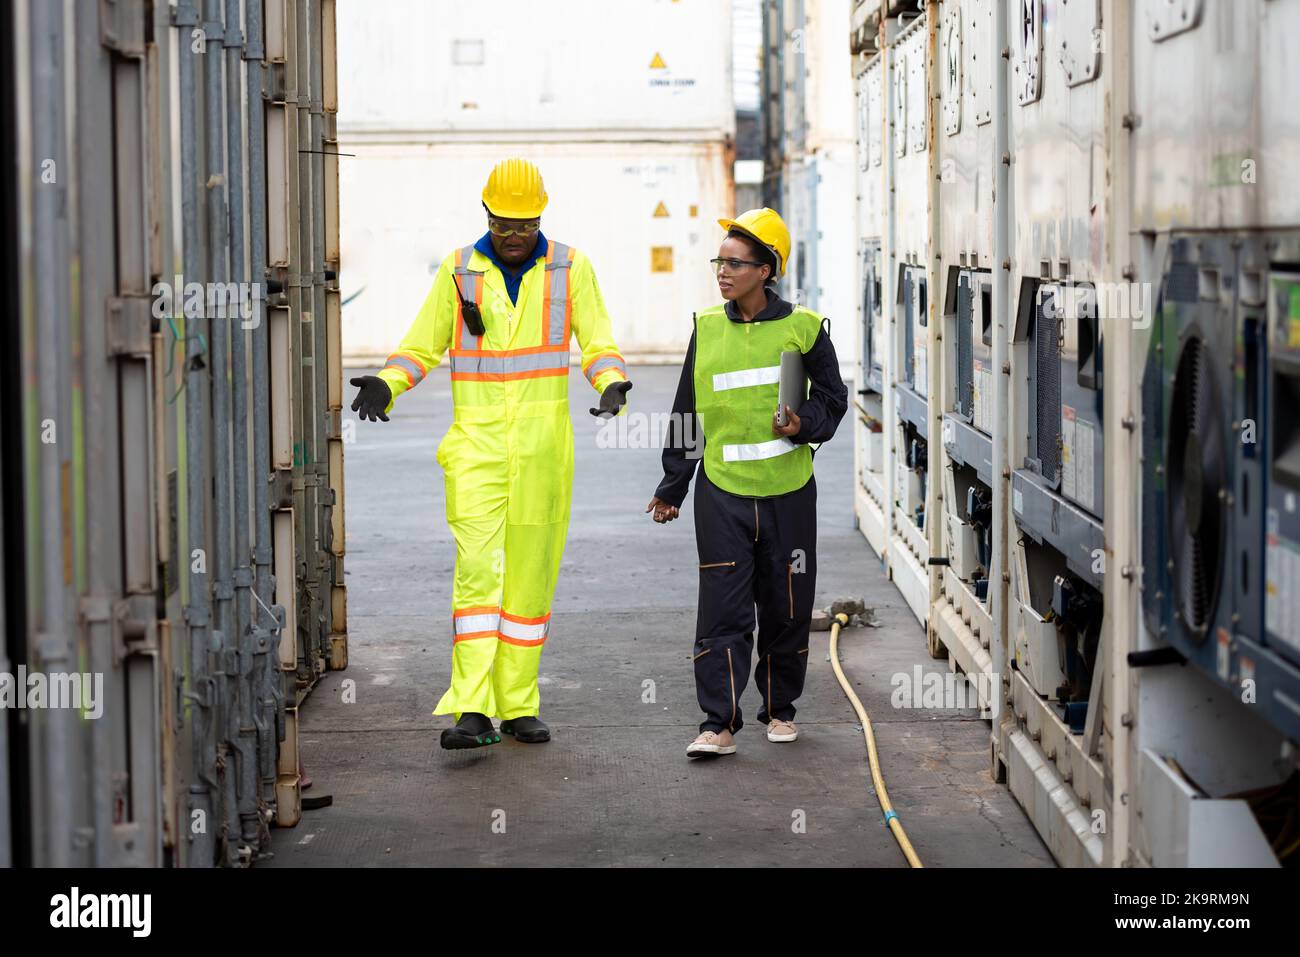 Young worker people working job at a warehouse,  Industrial Engineers, Safety Supervisors and Foremen in Hard Hats and Safety Vests Walking in Shippin Stock Photo